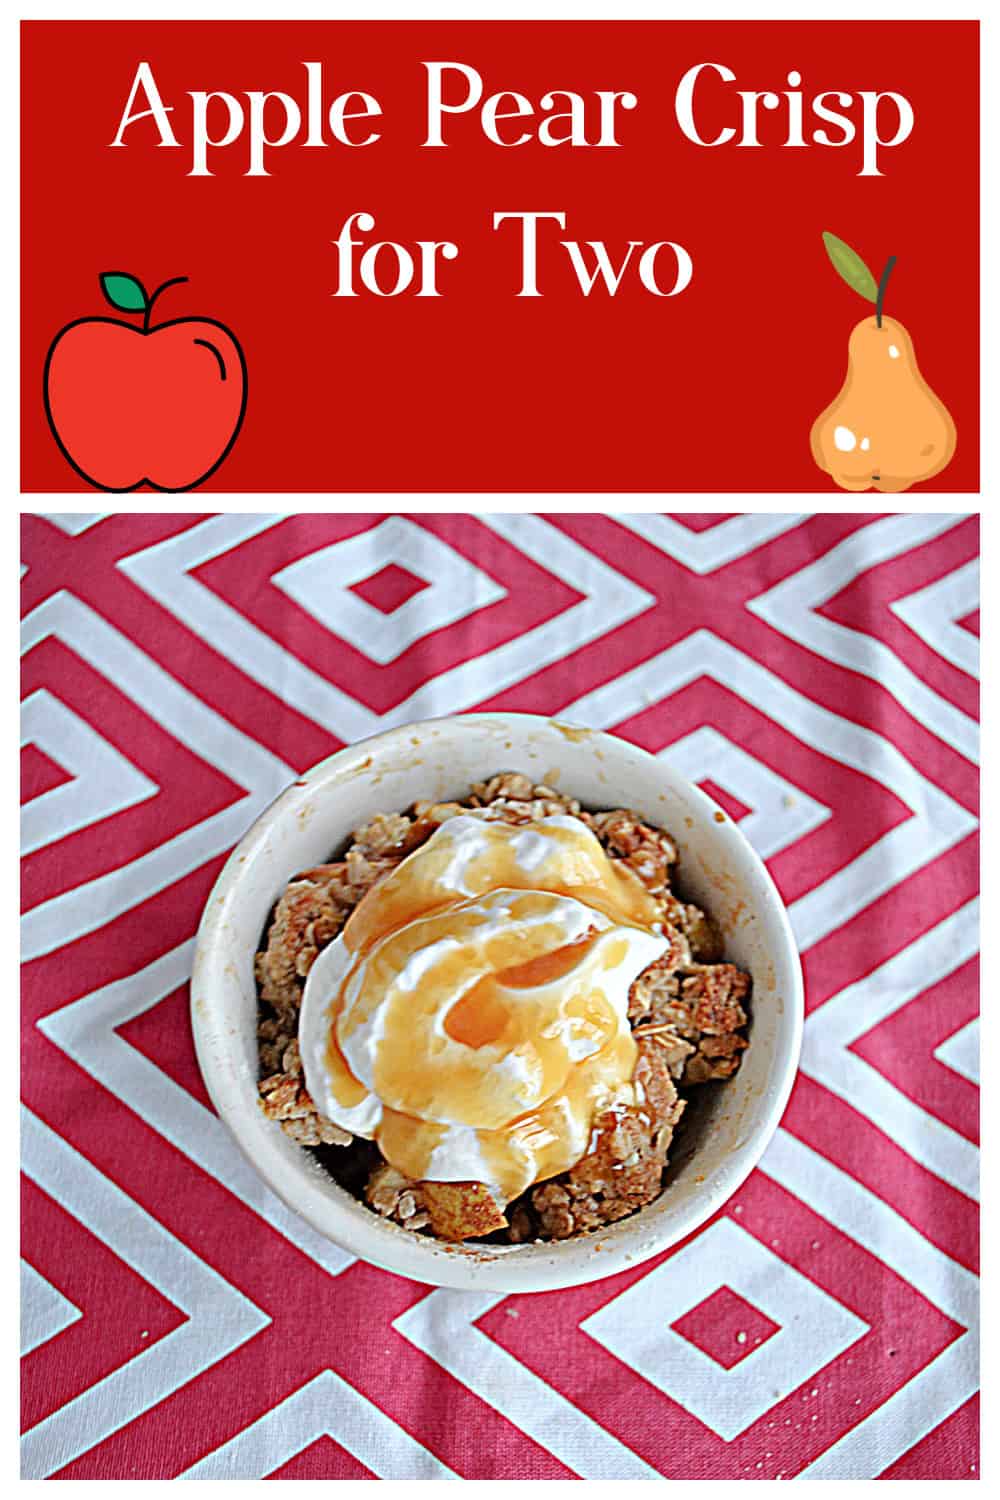 Pin Image:   Text title, a bowl of apple pear crisp with whipped cream on top.